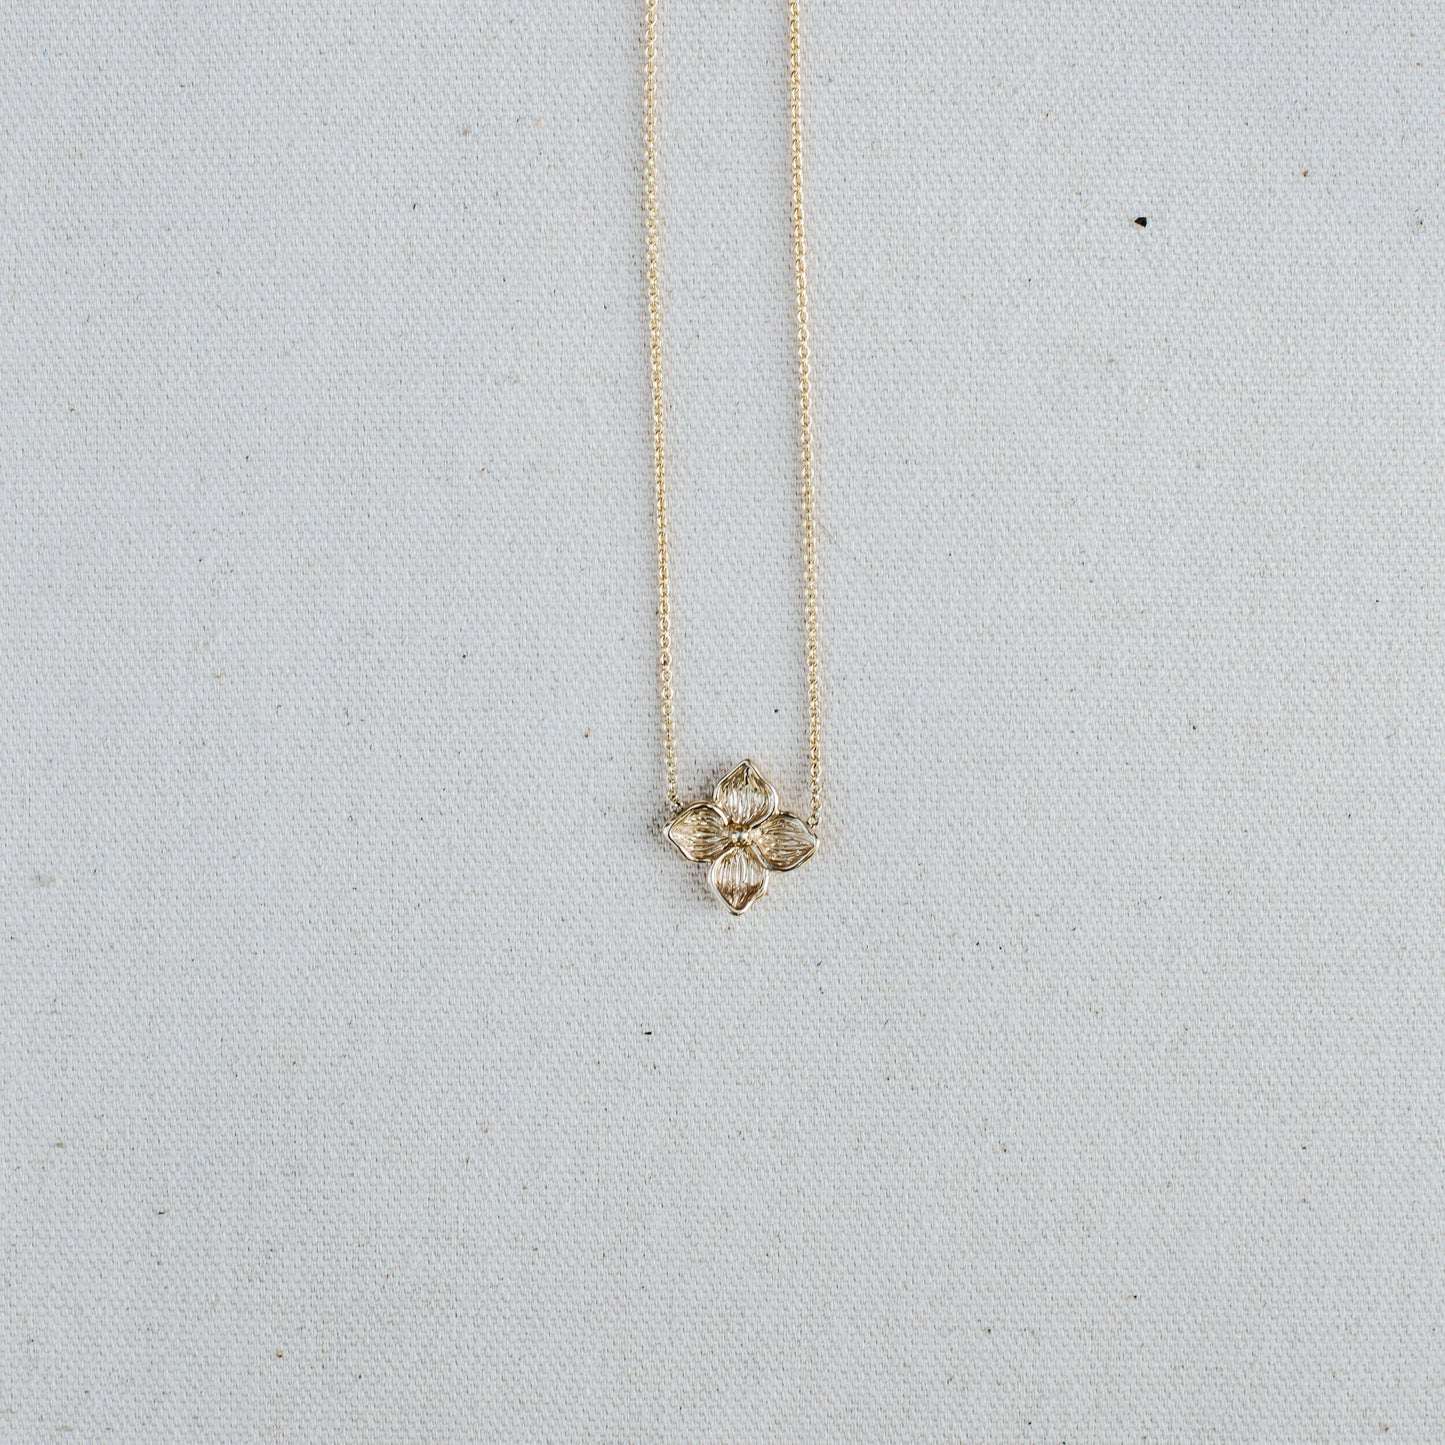 14K Yellow Gold Hydrangea Necklace handmade by Jewel in the Sea